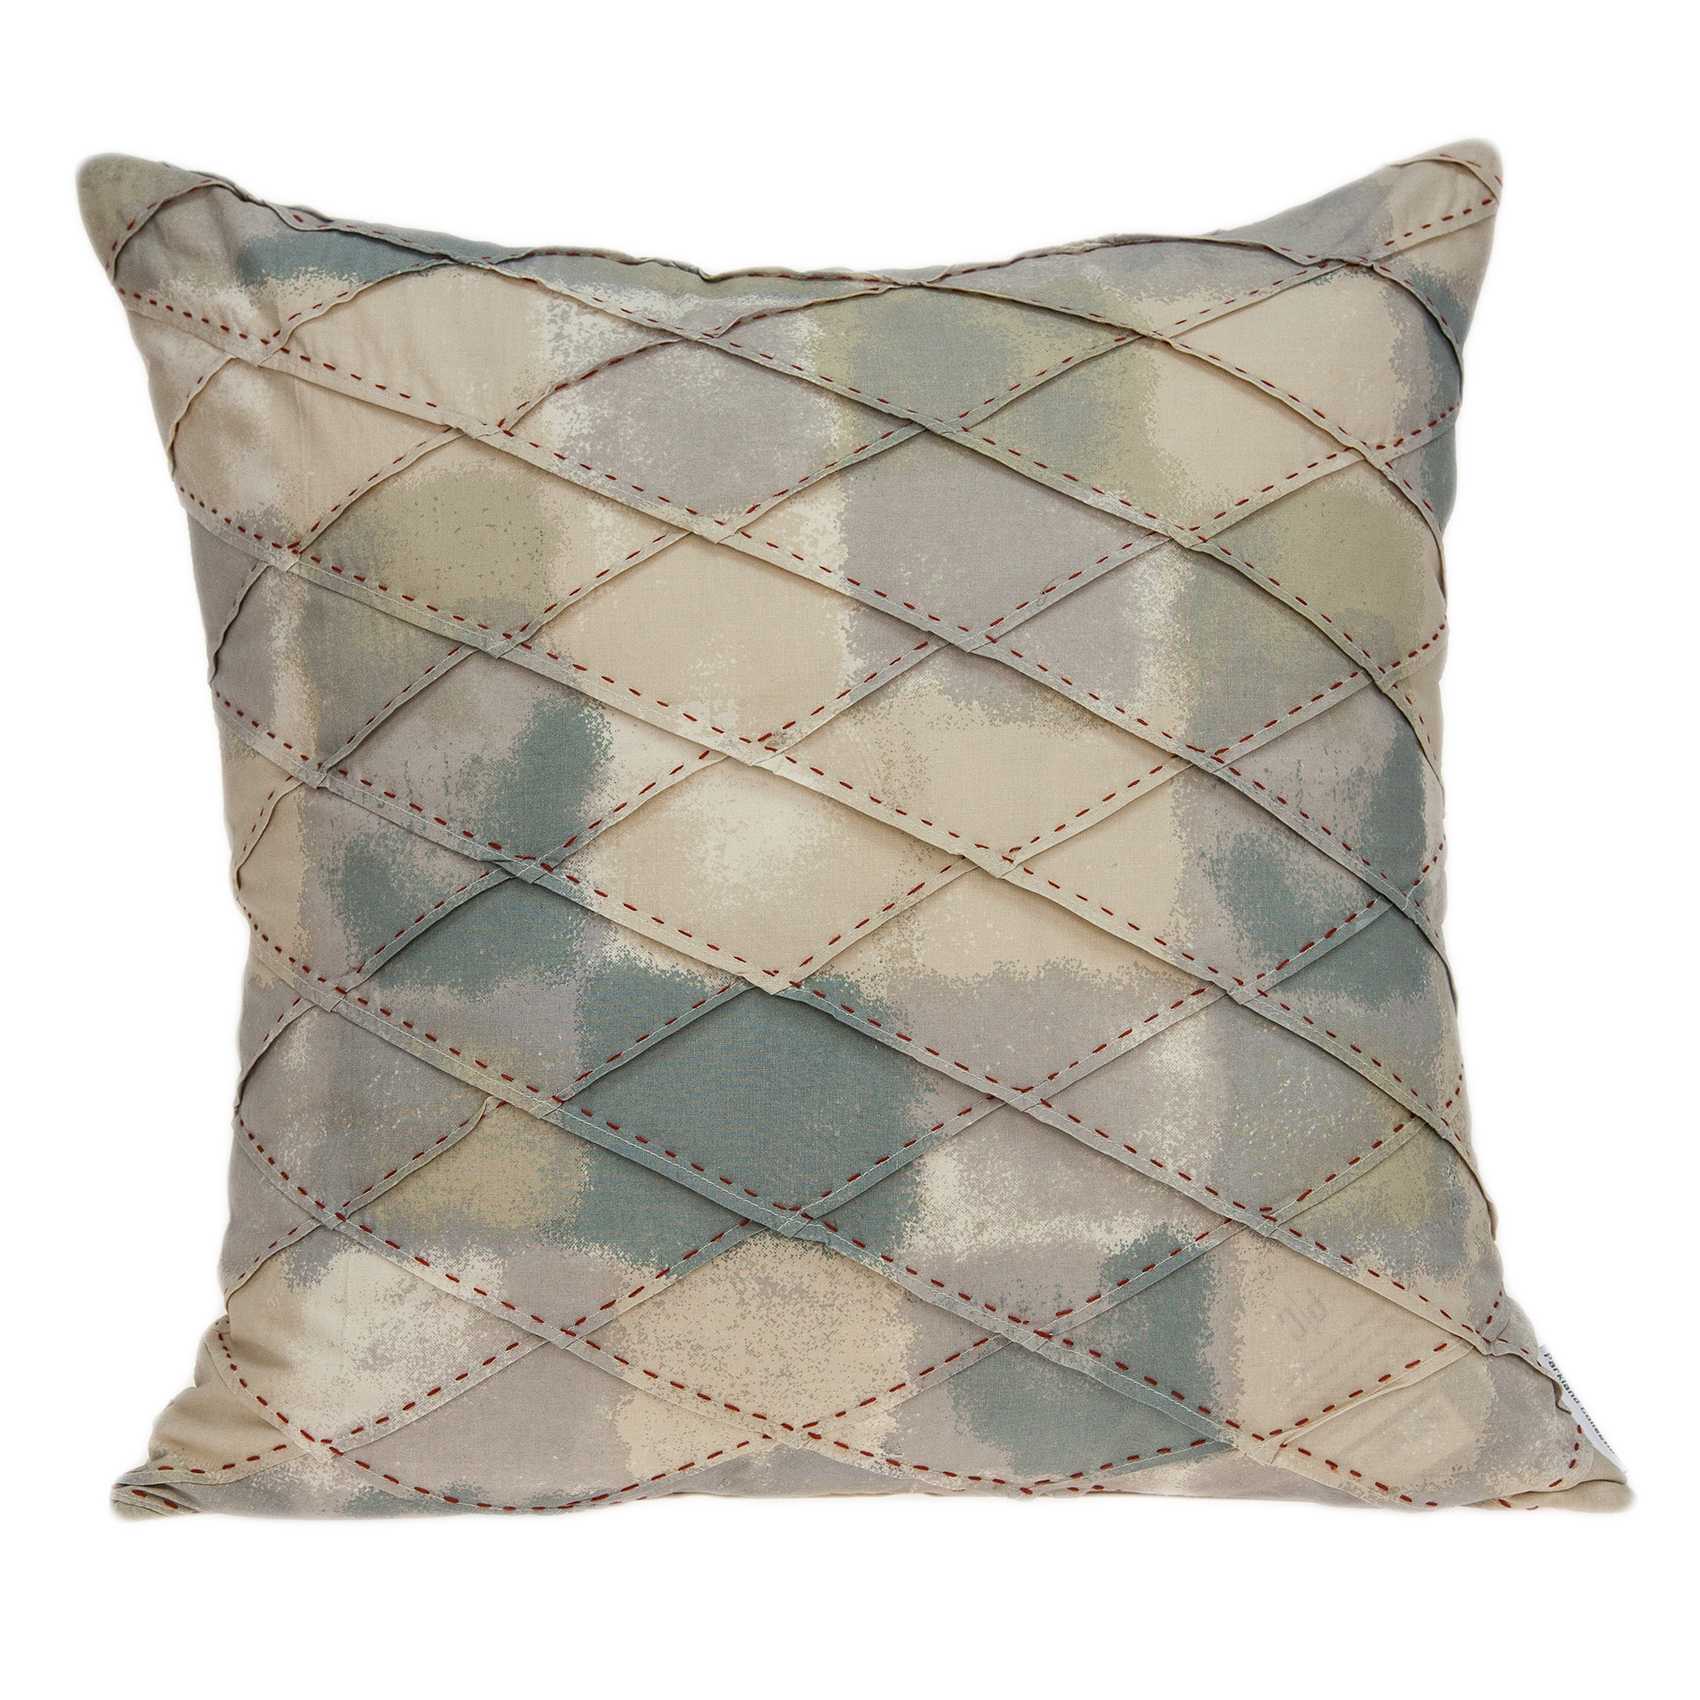 20" x 0.5" x 20" Transitional Cool Multicolor Accent Pillow Cover